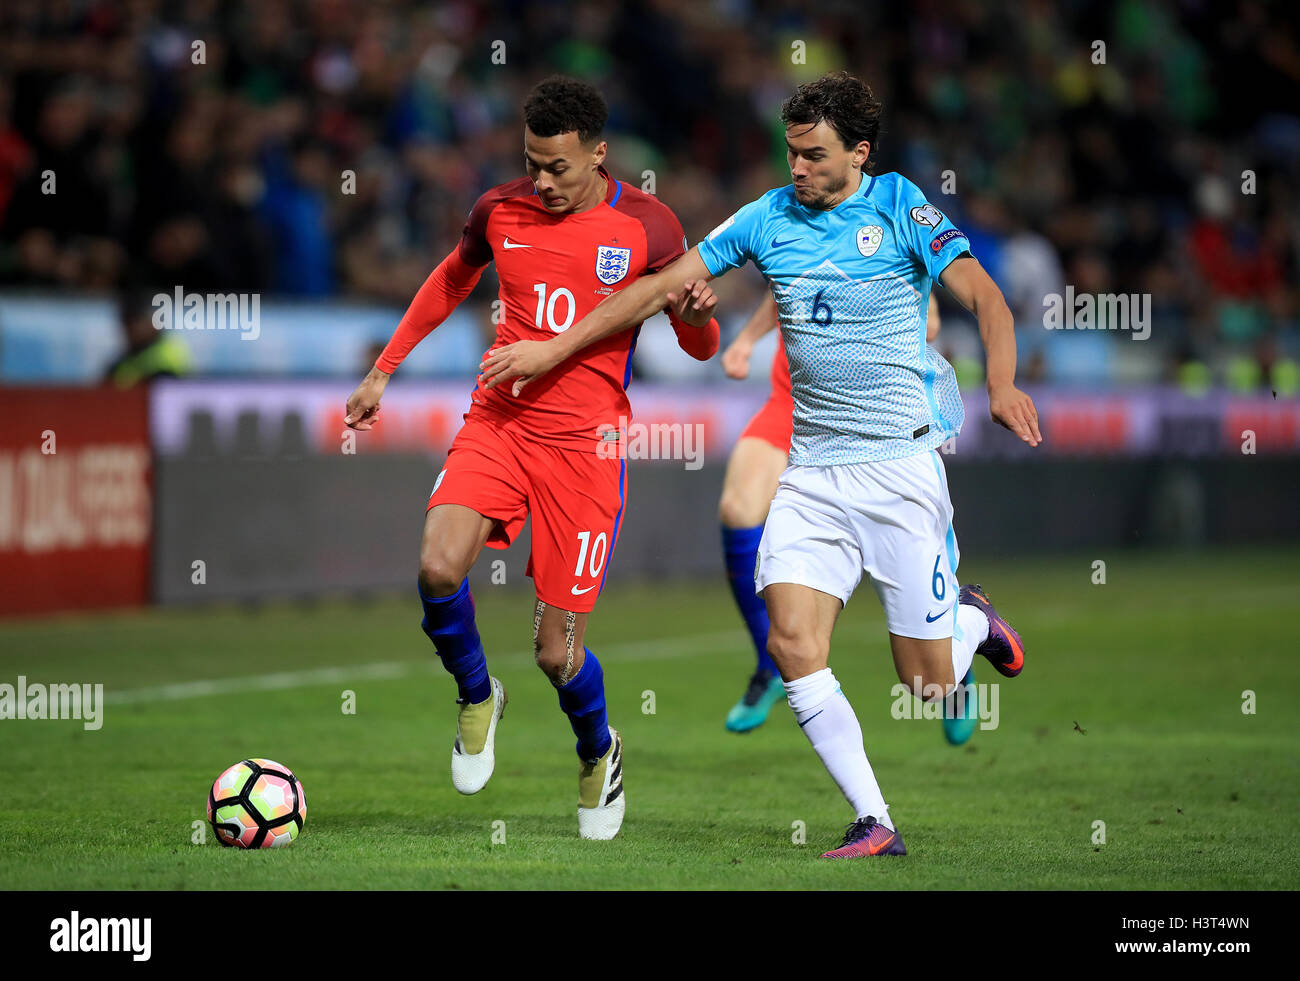 England's Dele Alli (left) and Slovenia's Rene Krhin (right) battle for the ball during the 2018 FIFA World Cup Qualifying match at the Stozice Stadium, Ljubljana. Stock Photo